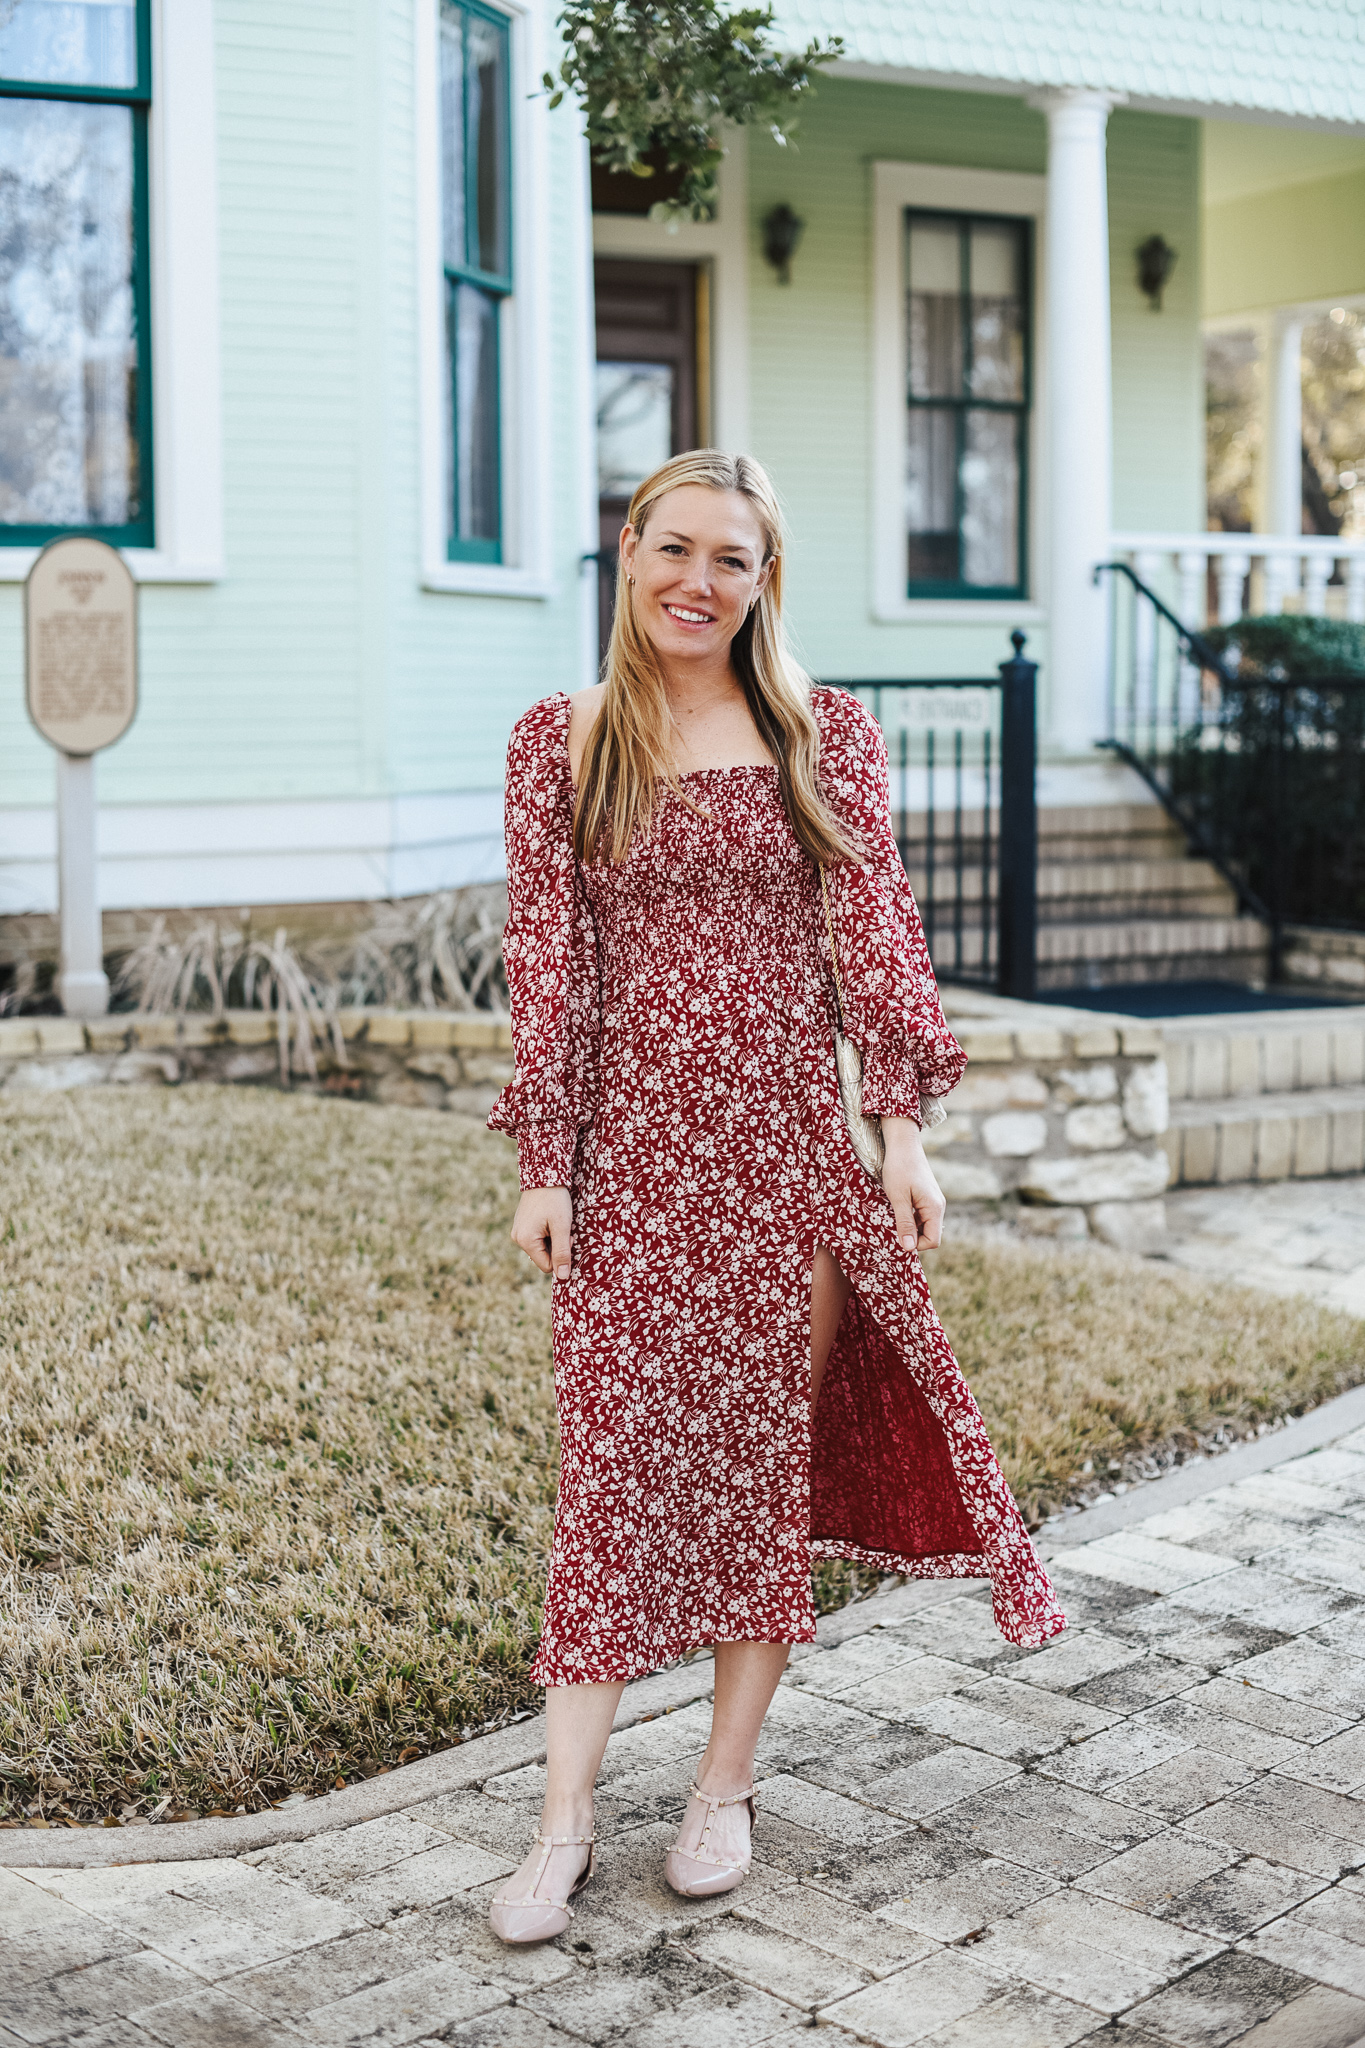 Reformation Dresses - Size Inclusive and Sustainable Too! - Denim